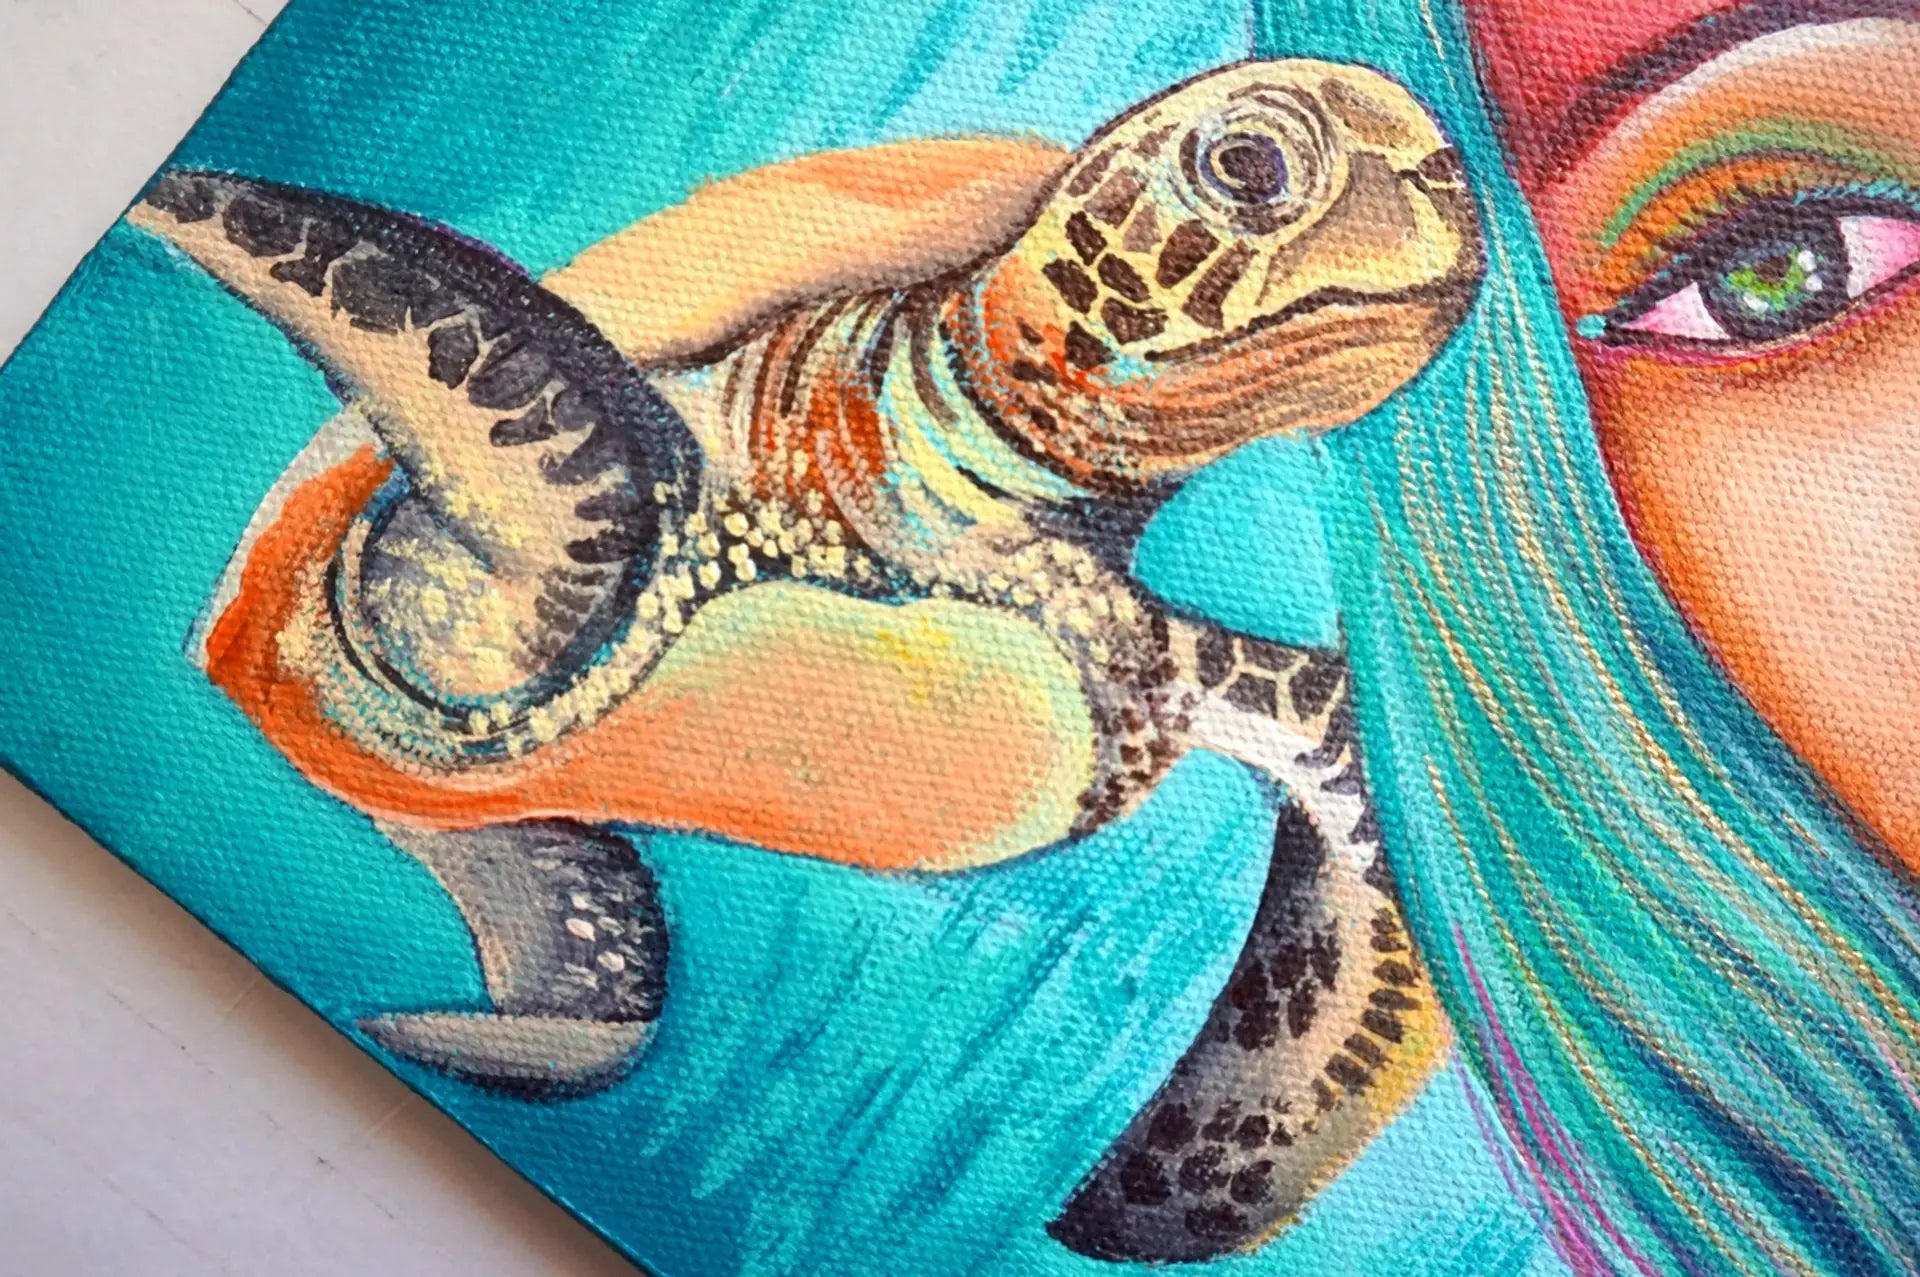 Underwater Harmony: Learn to Paint a Mermaid with Turtles using Acrylics on Canvas